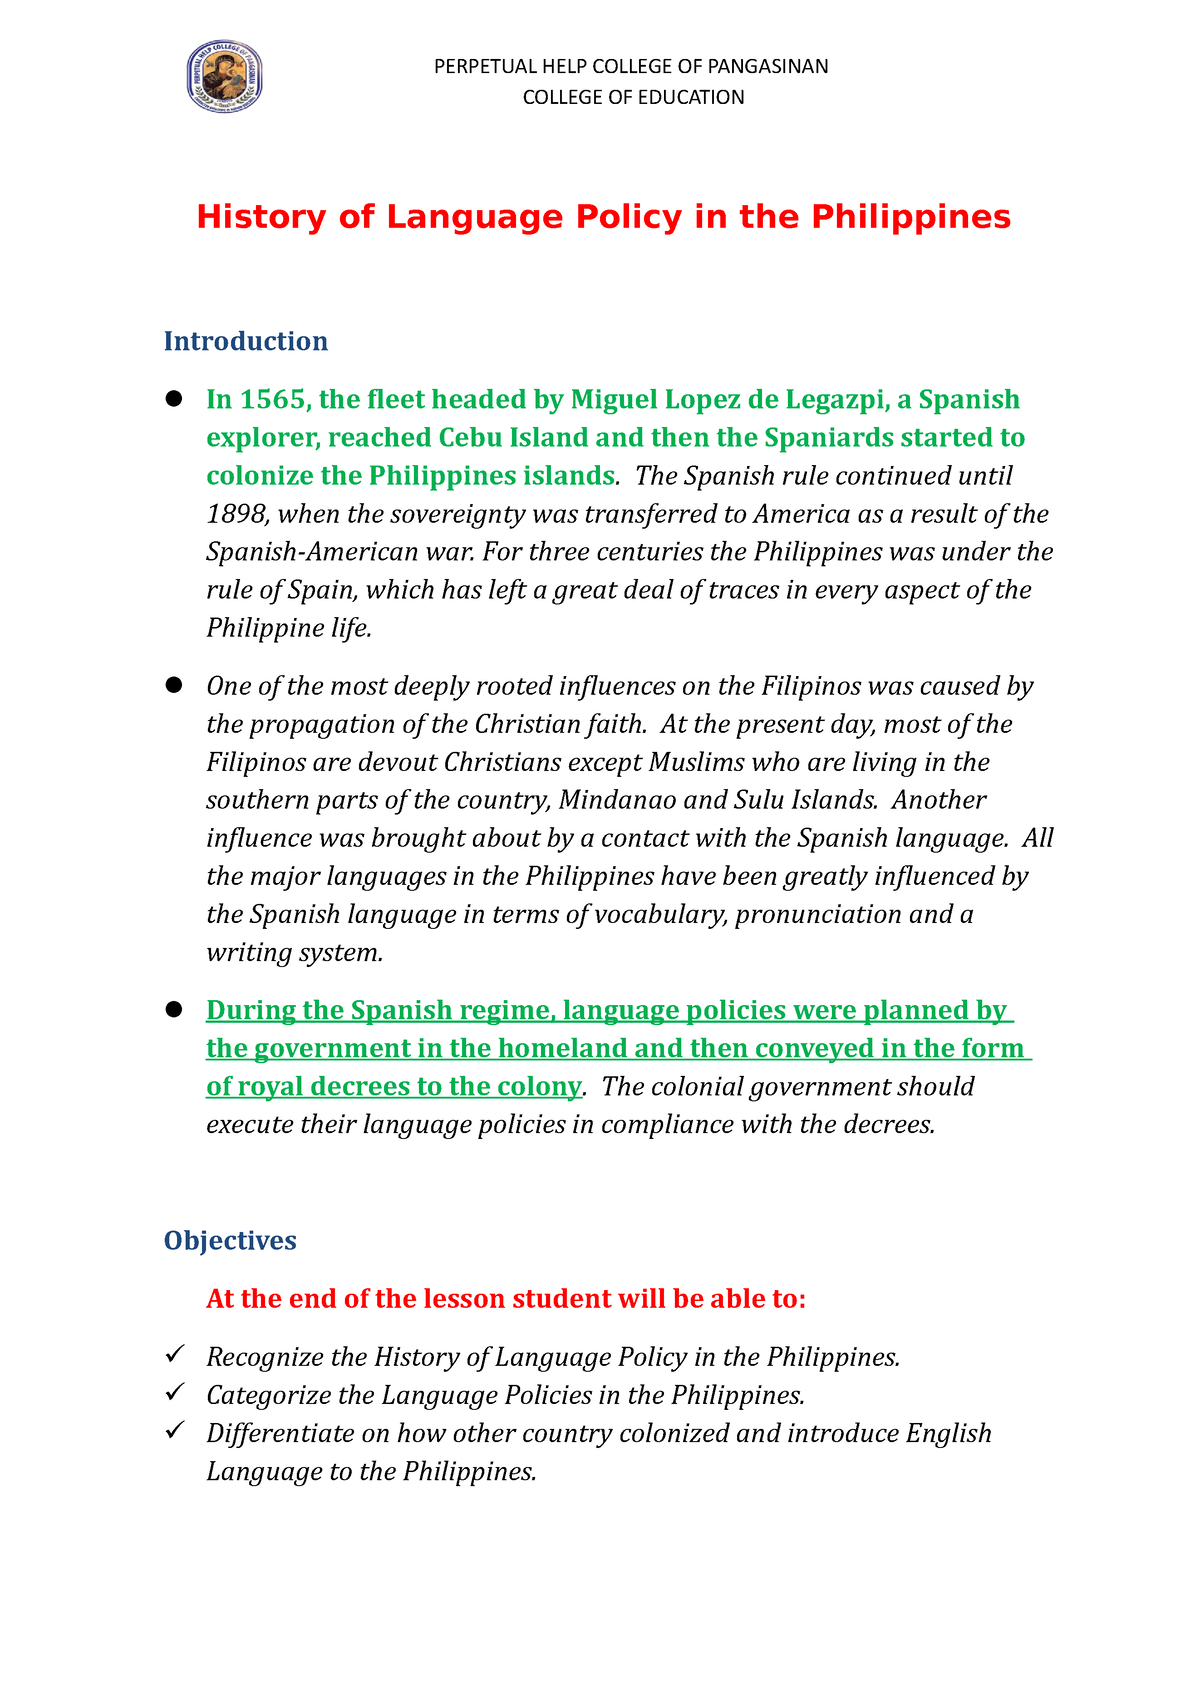 thesis topics for english language teaching in the philippines